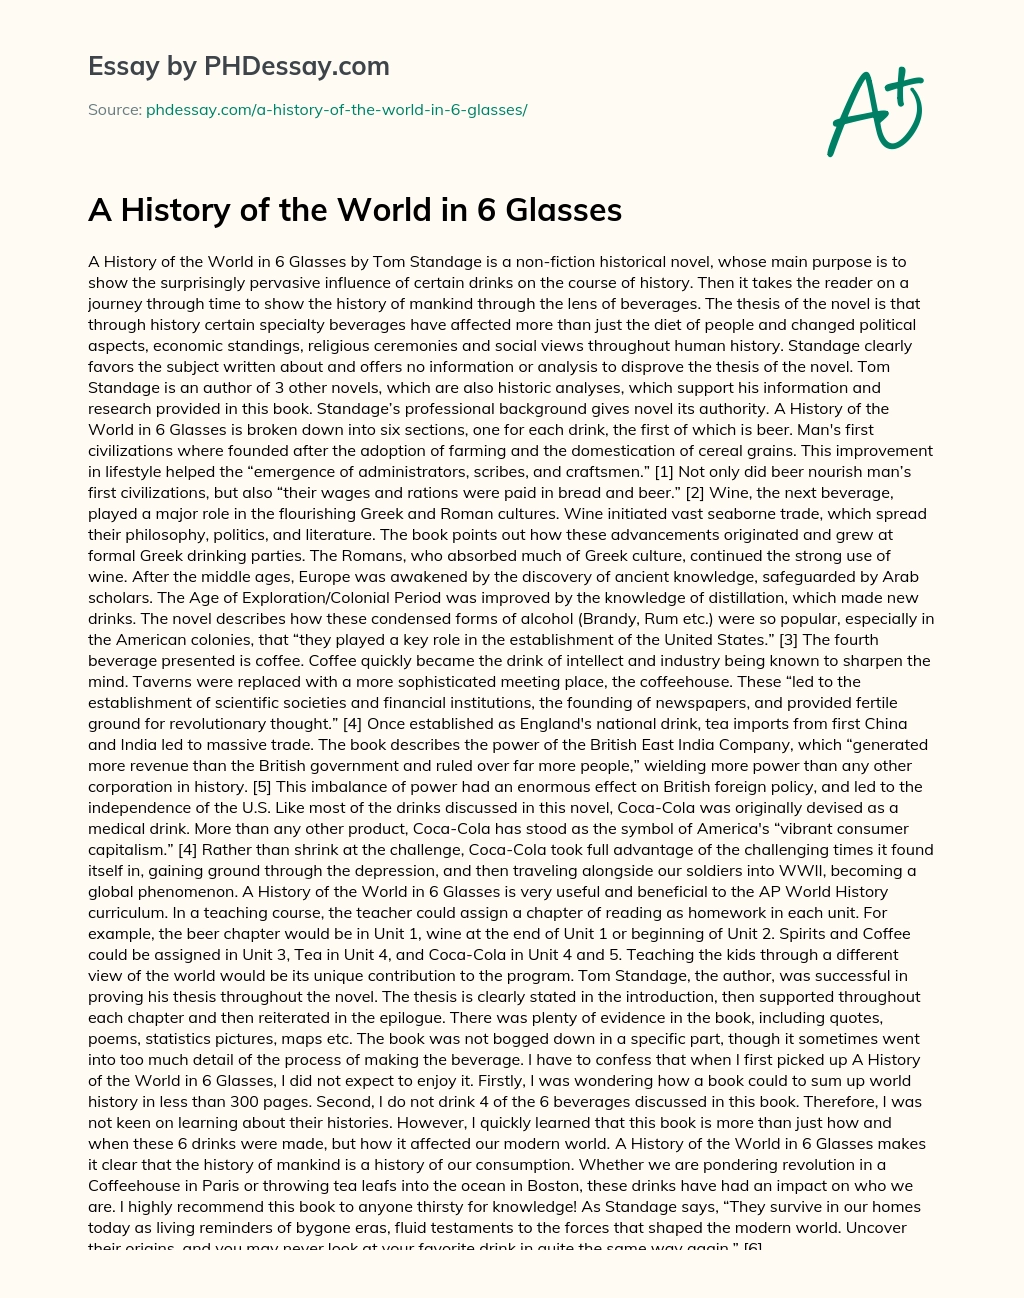 A History of the World in 6 Glasses essay